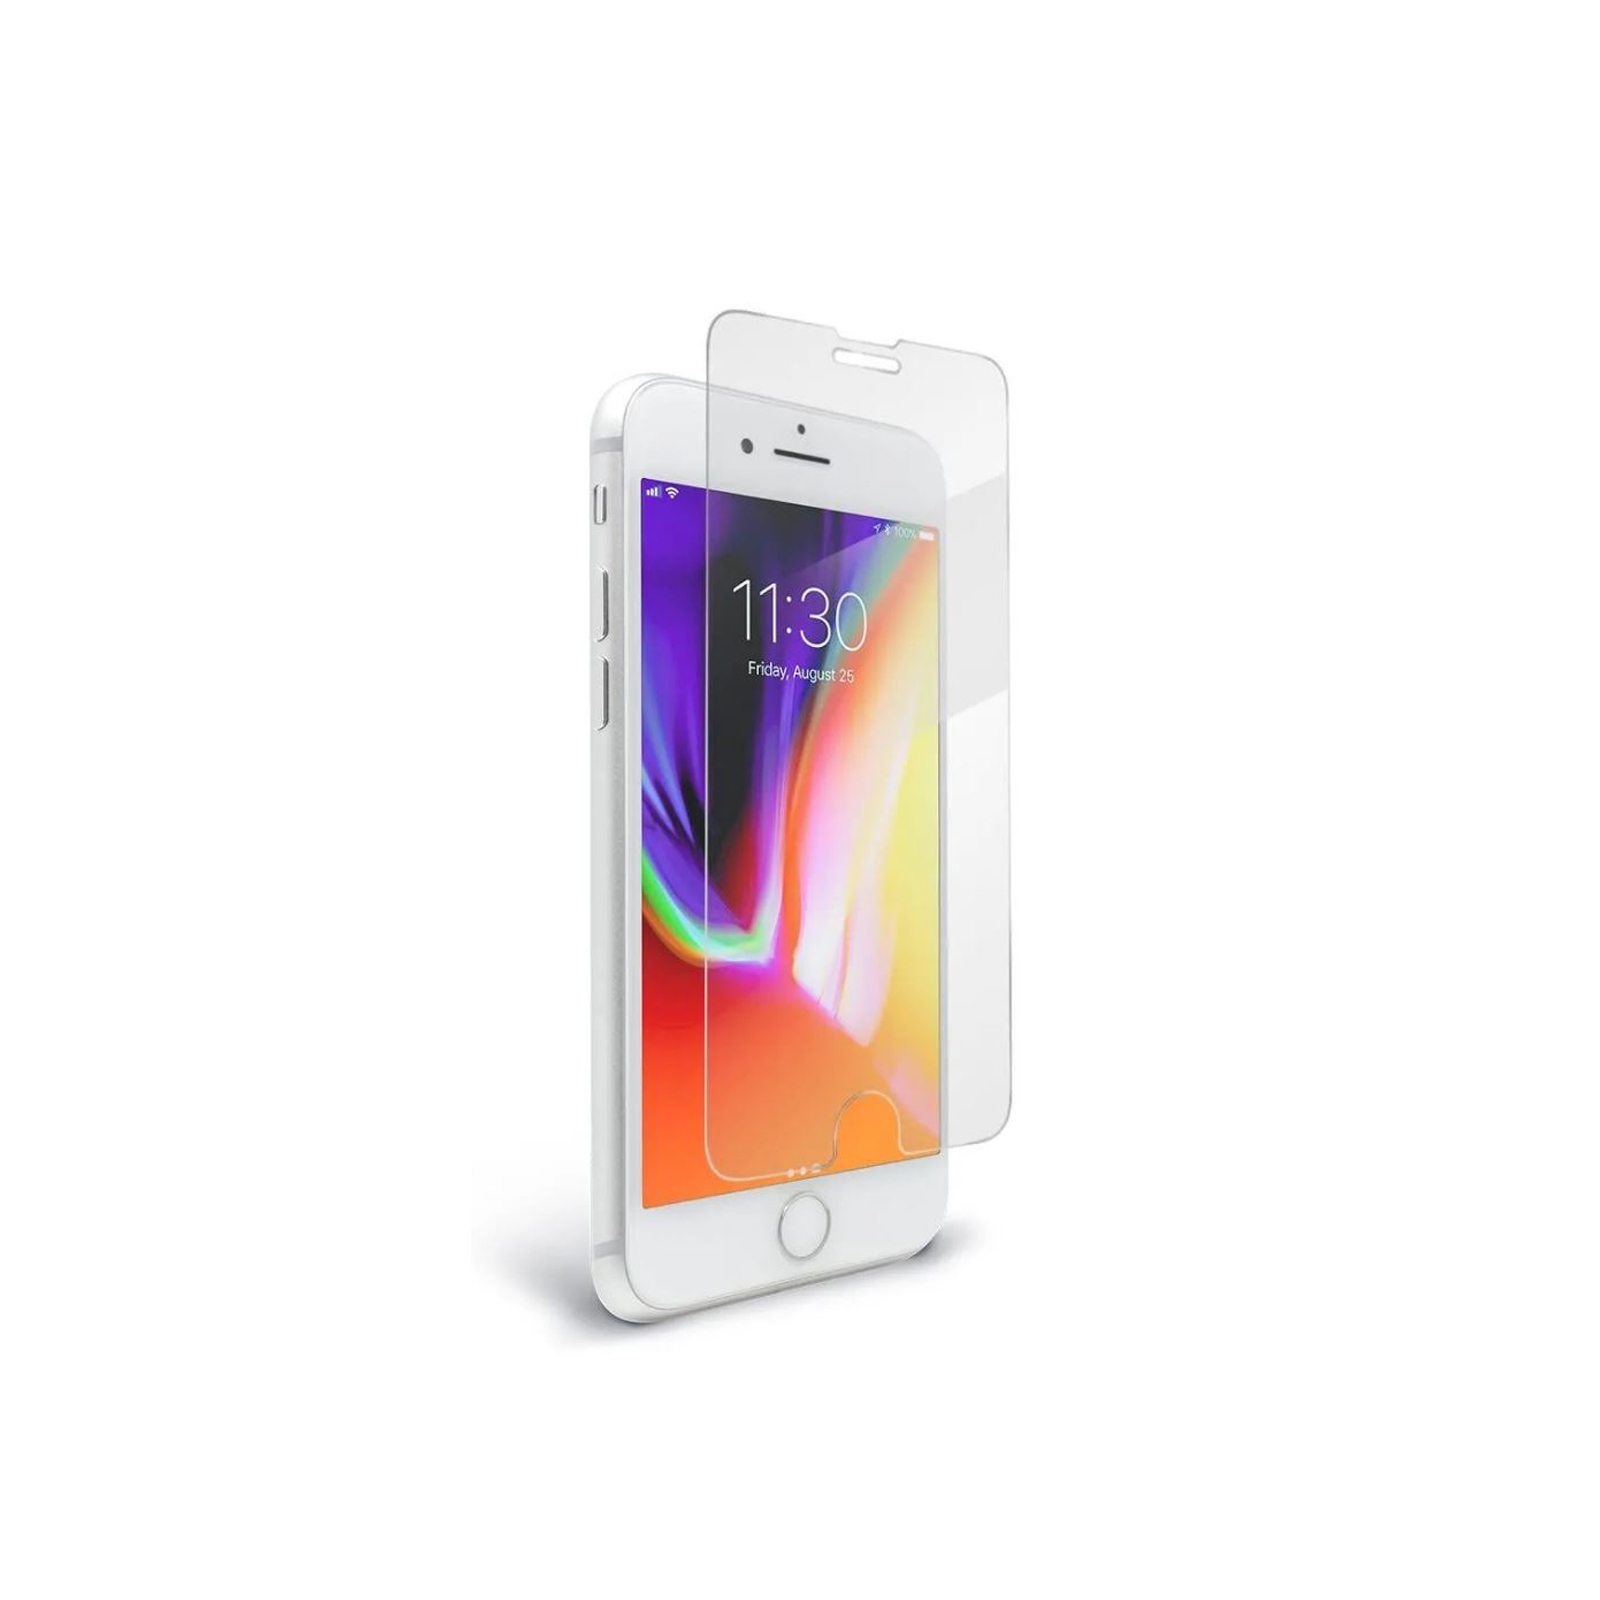 Pure ExpAl iPhone 6 Plus  / 7 Plus / 8 Plus Screen Protector [Clear]